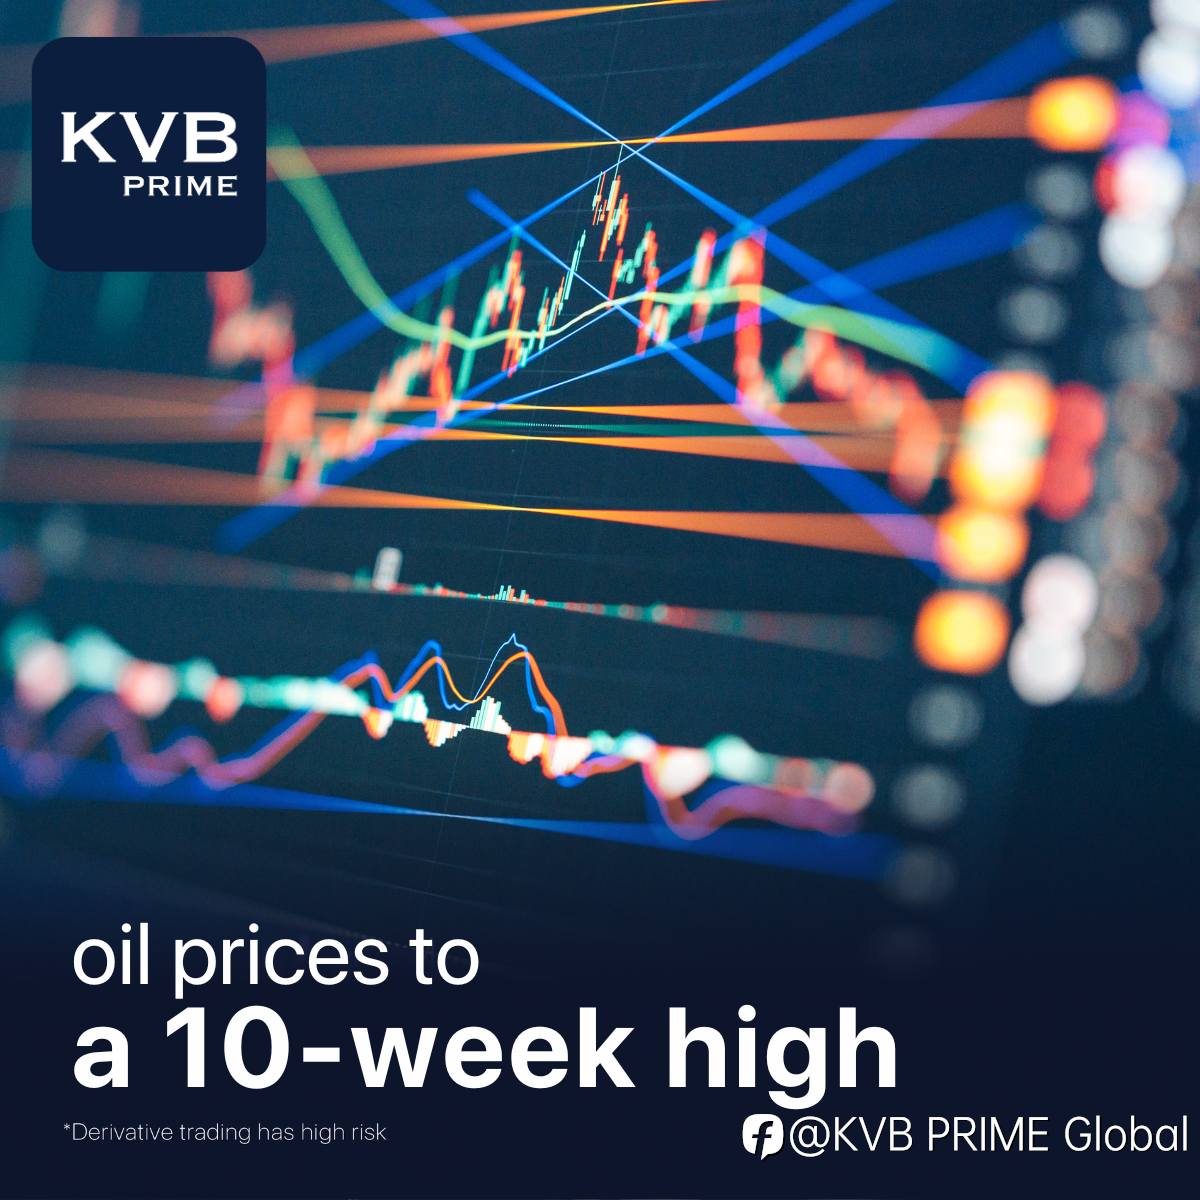 Tighter supply and subdued U.S. inflation lifted oil prices to a 10-week high.